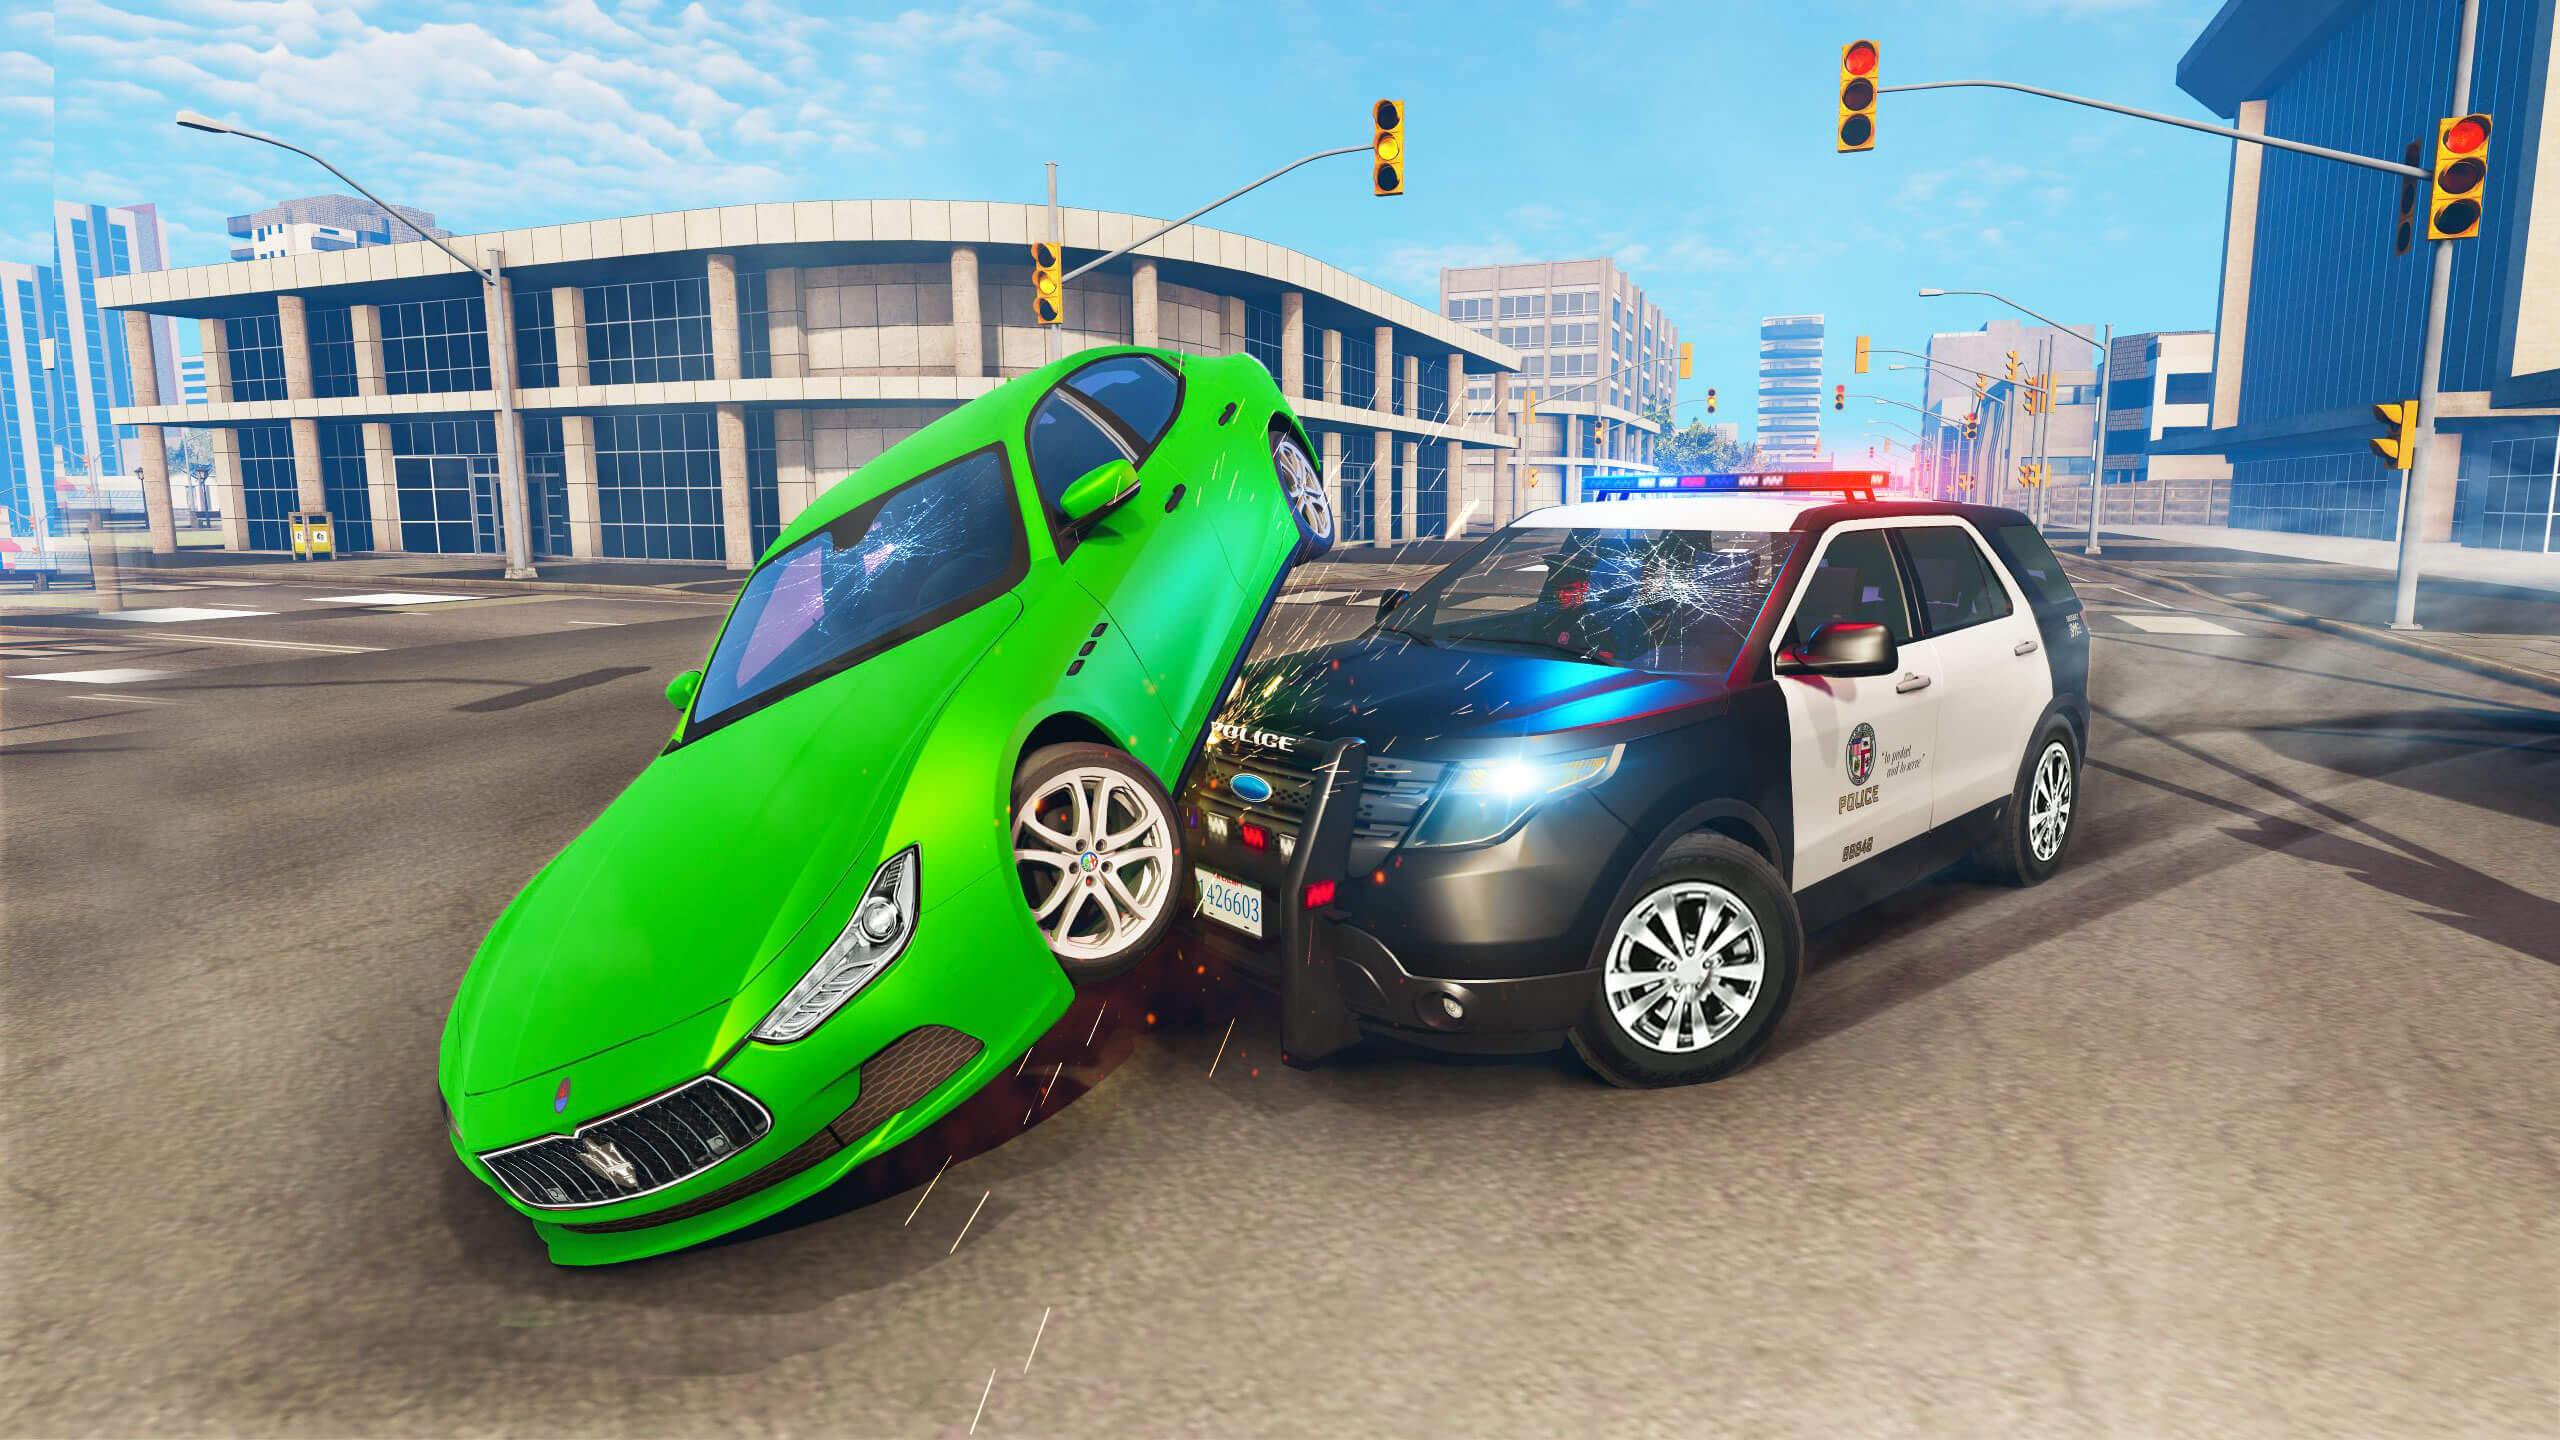 Police Duty: Crime Fighter screenshot game